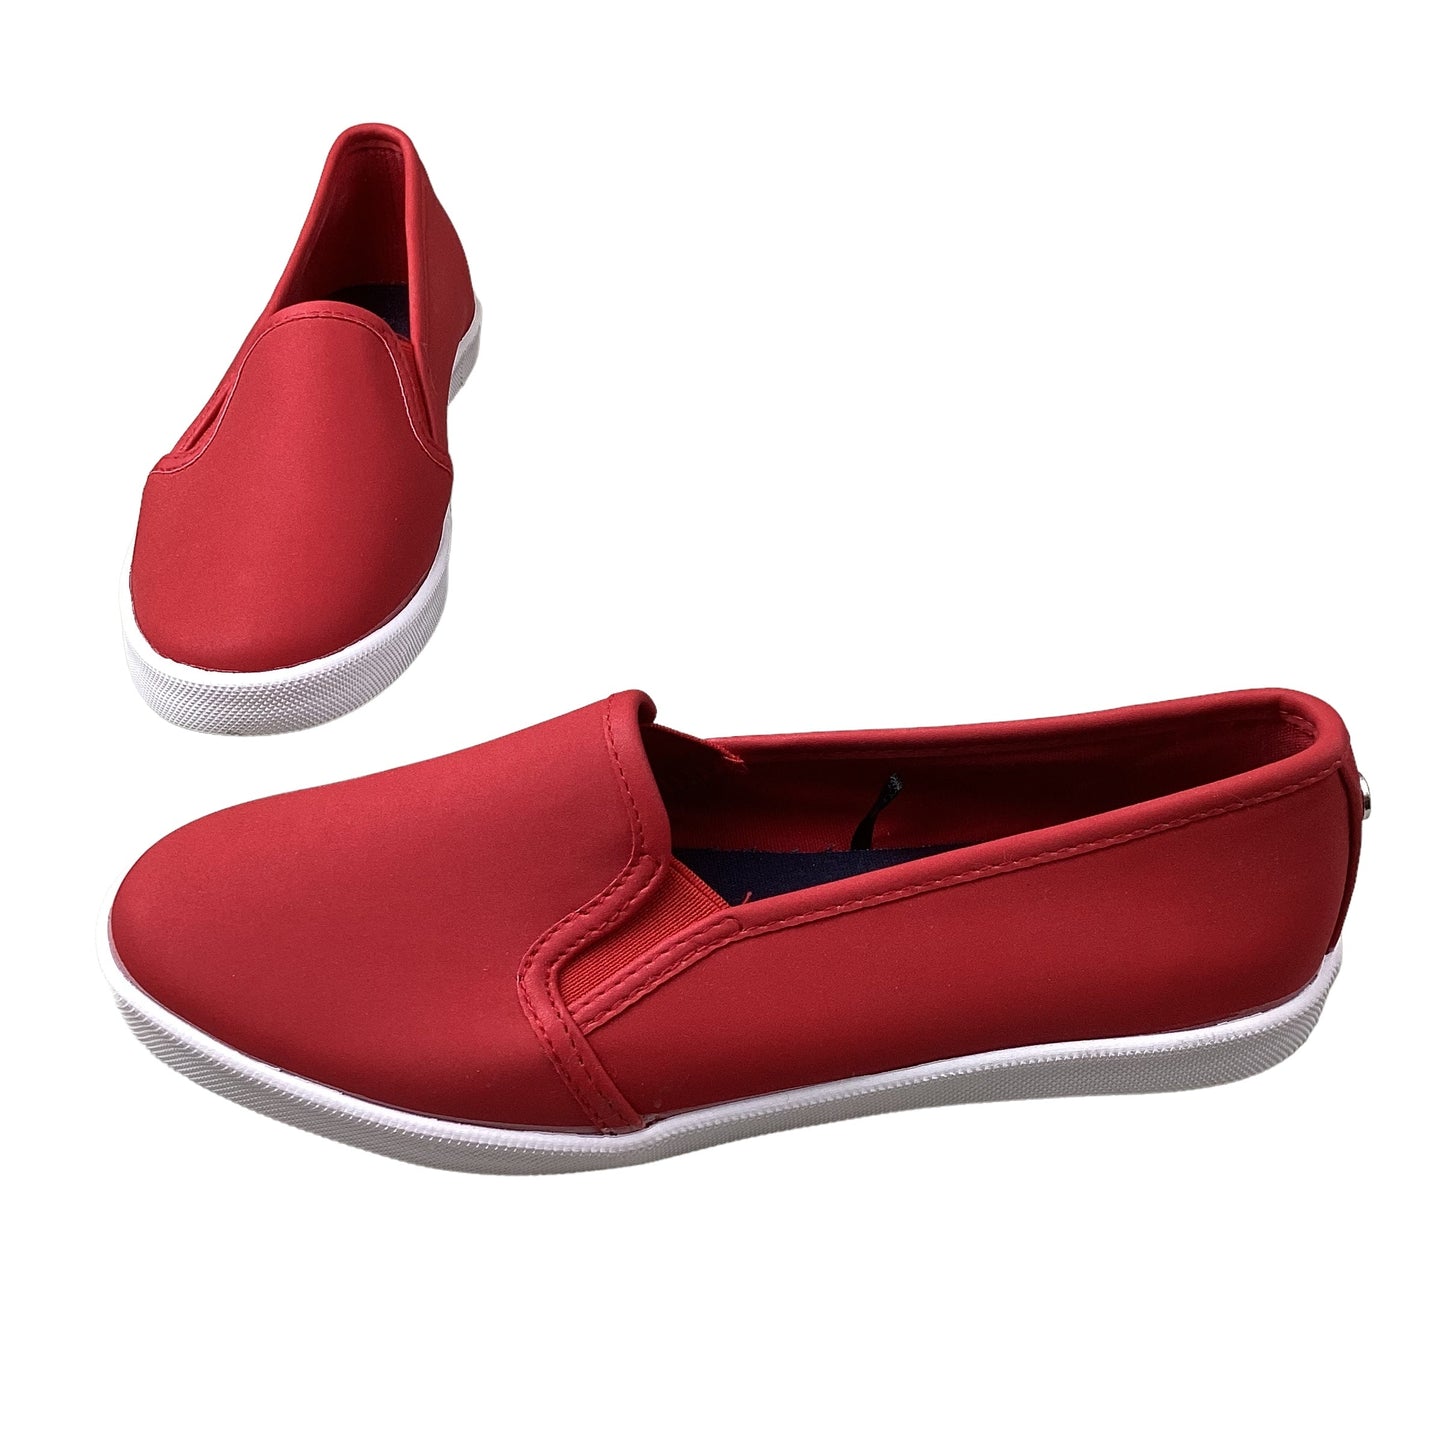 Shoes Flats Mule & Slide By Nautica  Size: 6.5